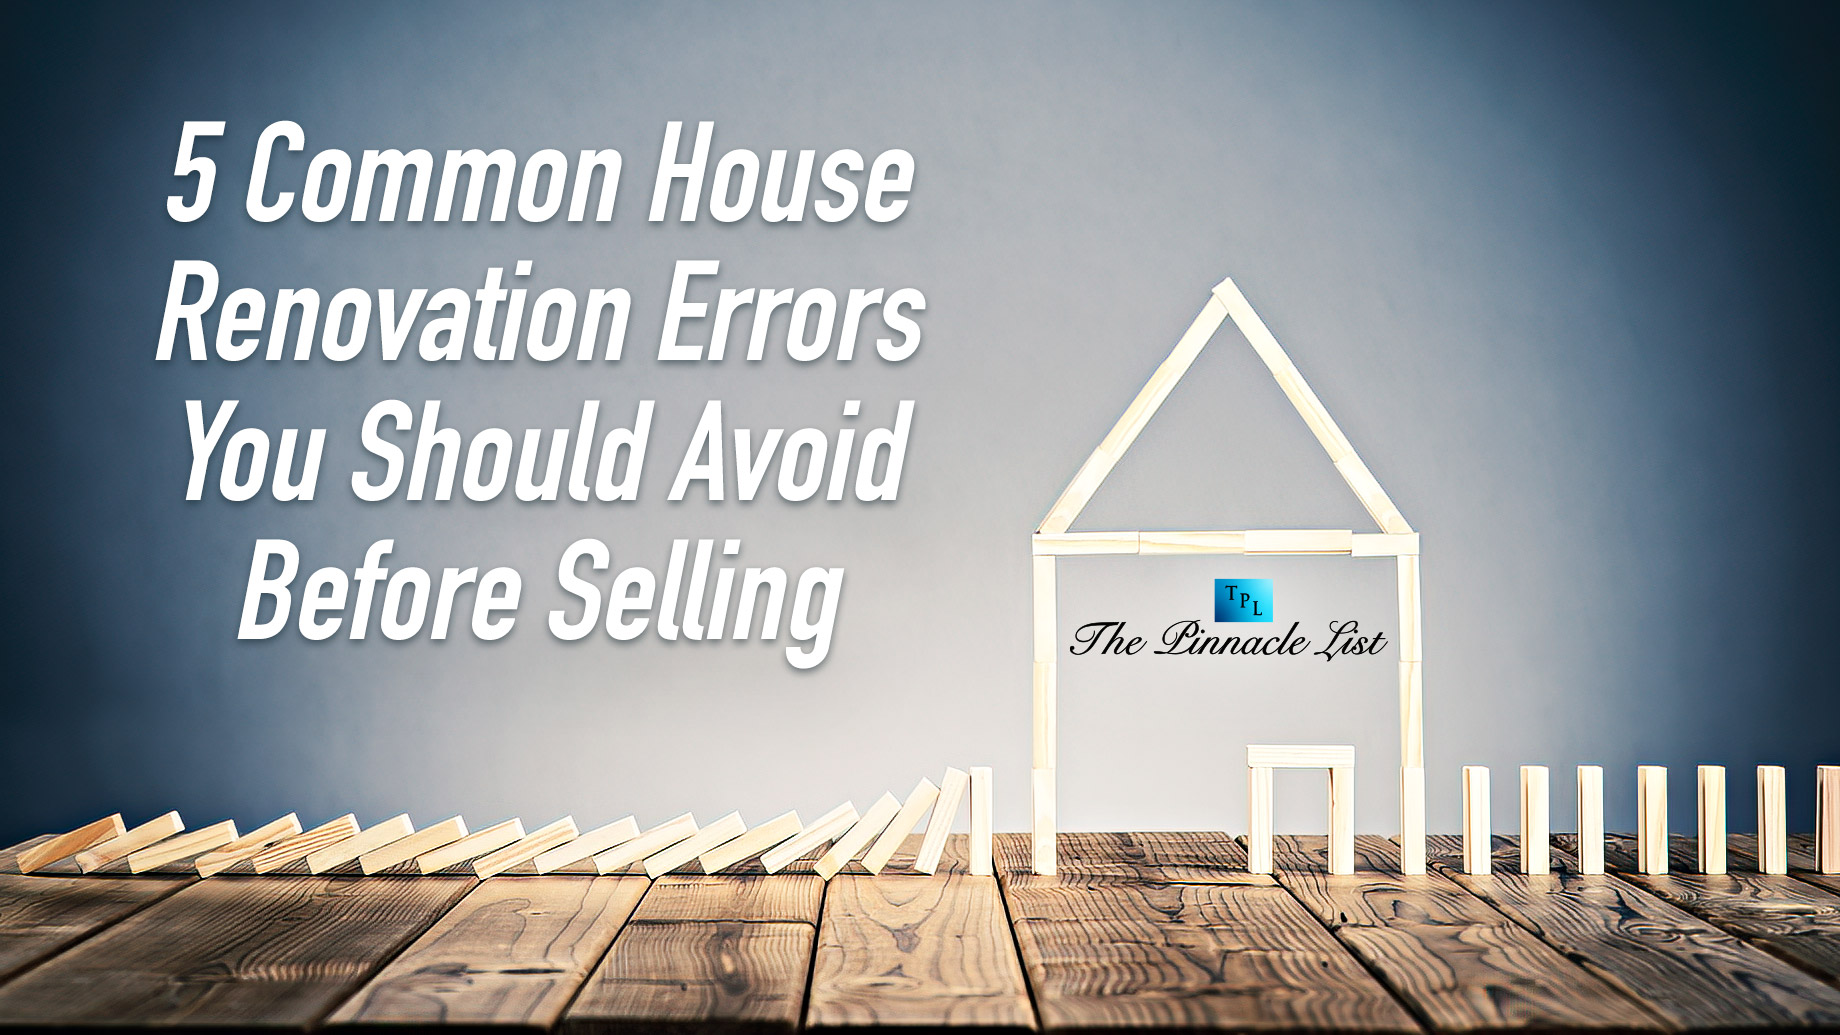 5 Common House Renovation Errors You Should Avoid Before Selling